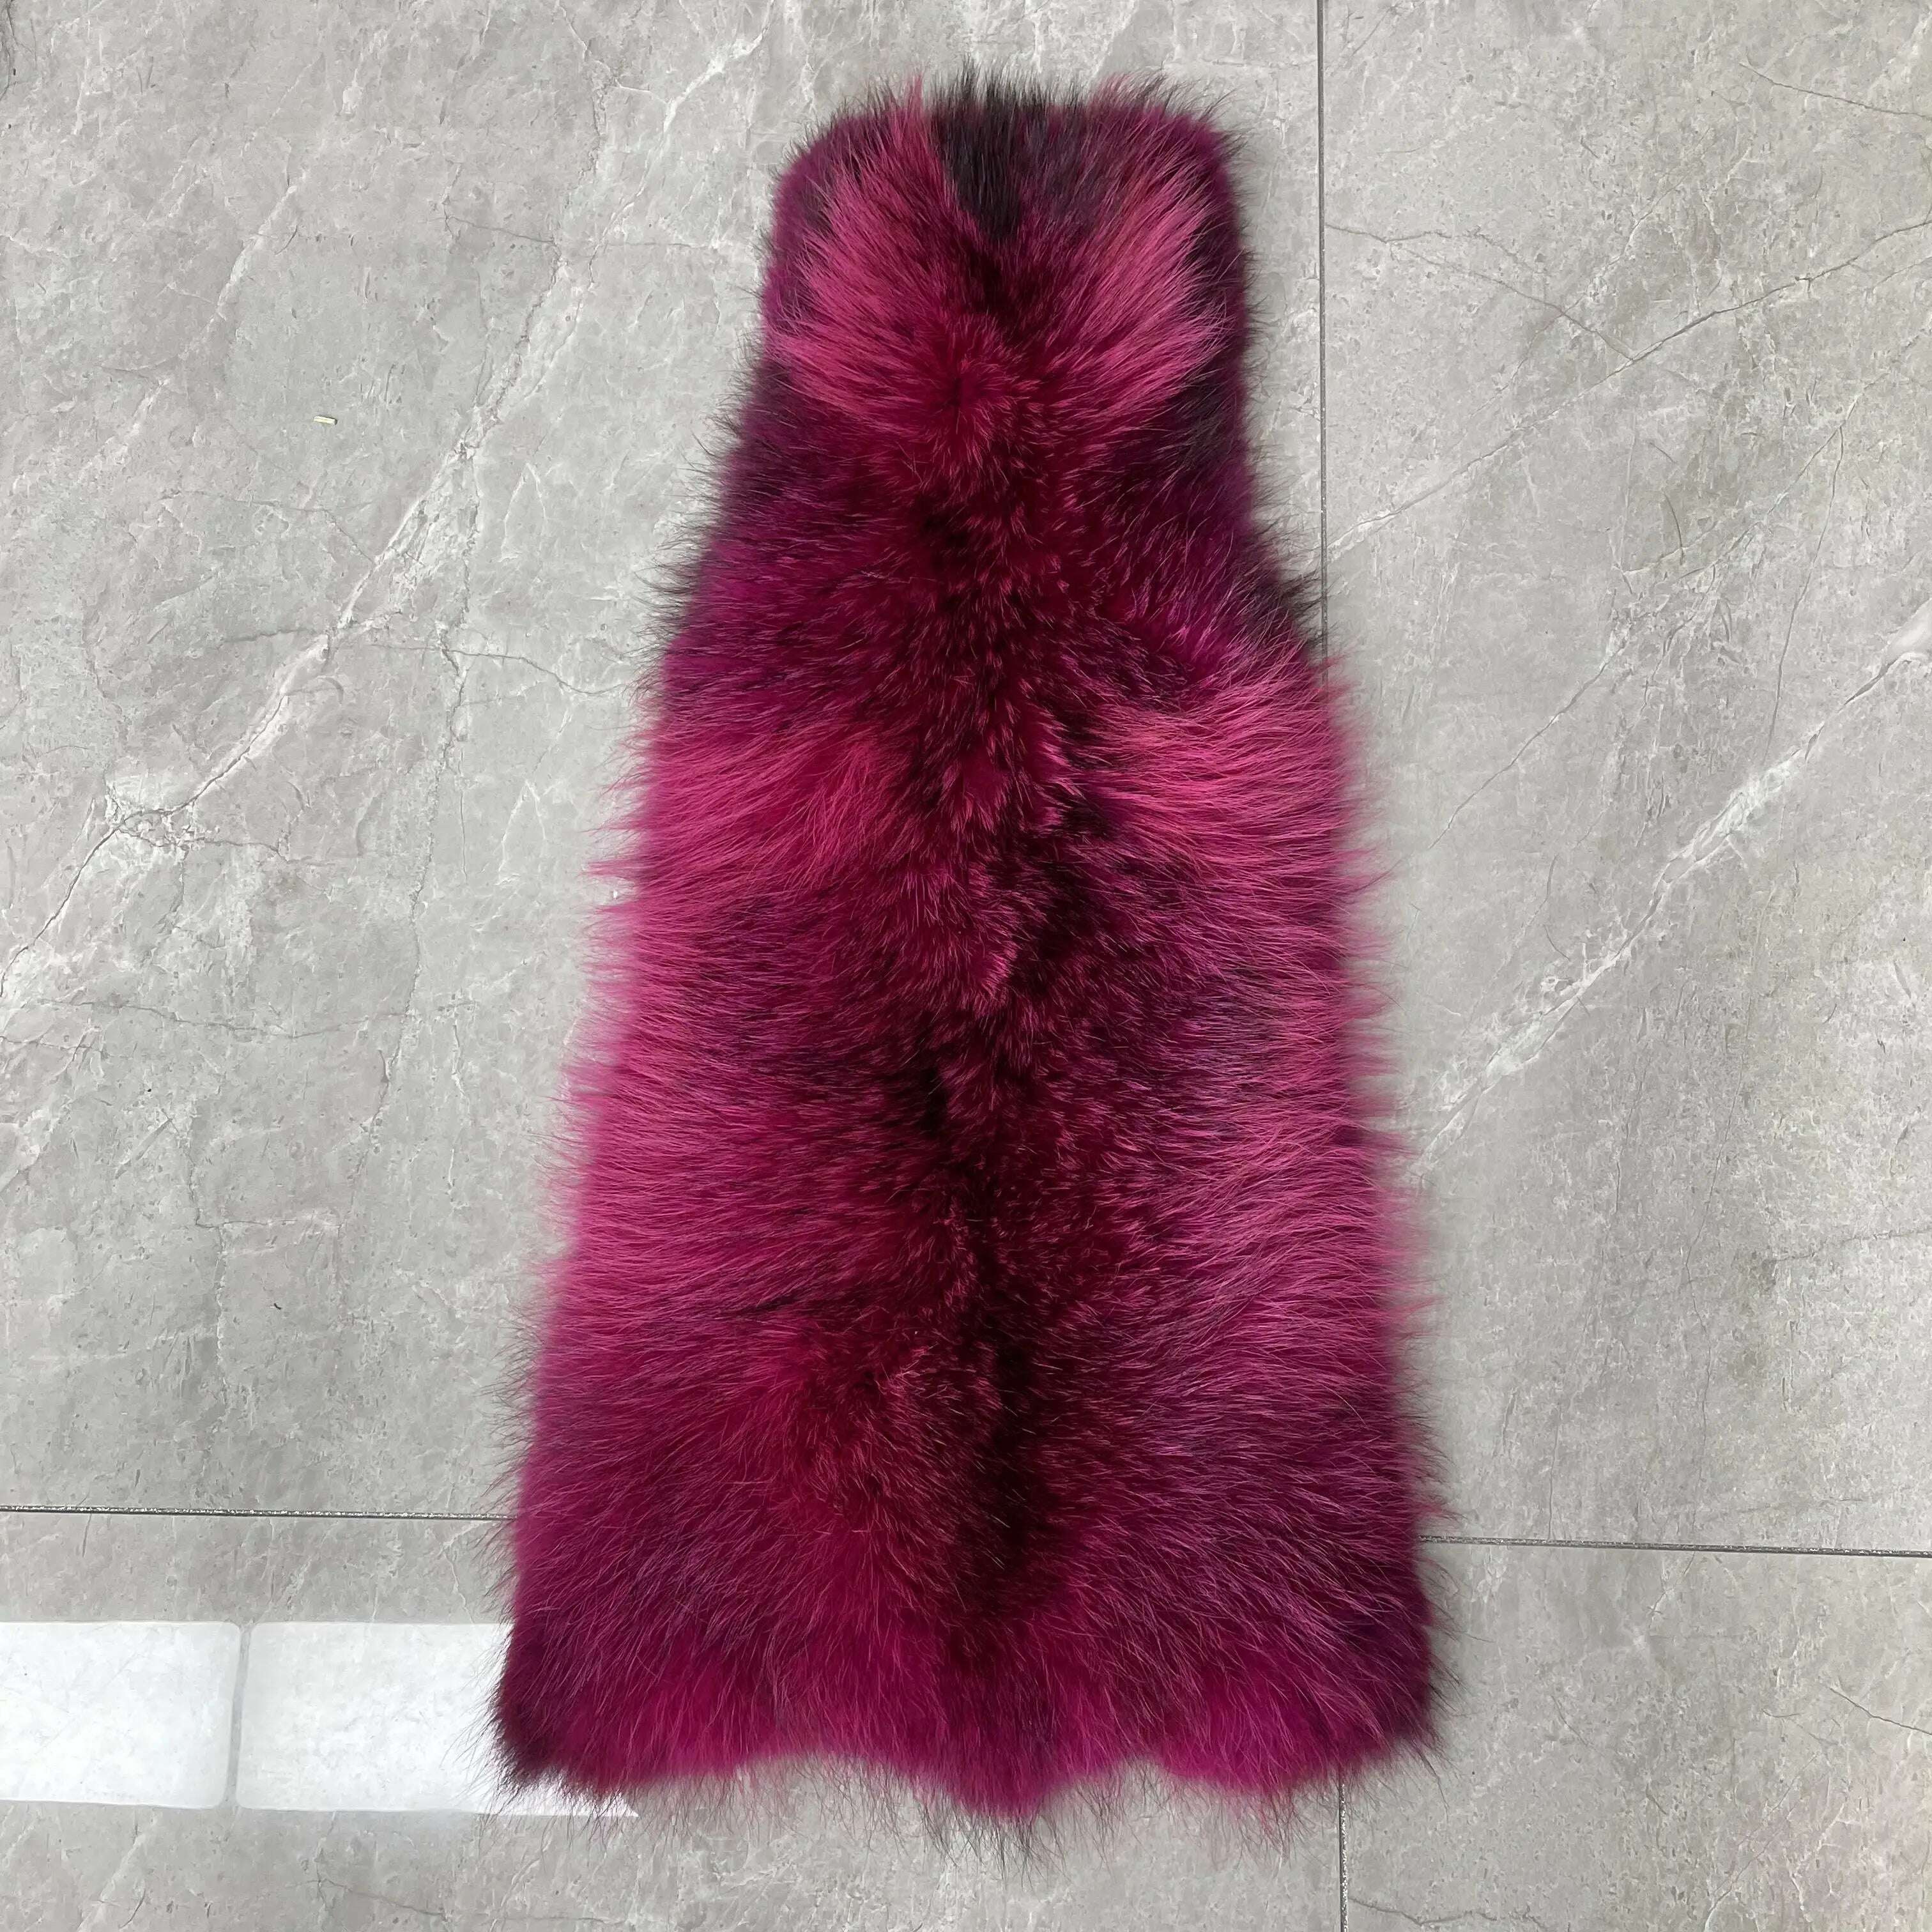 KIMLUD, Men Clothes Golden Island White Special Fox Fur Coat Full Pelt Customized Size Available, Hot Pink / XS(88cm), KIMLUD Women's Clothes